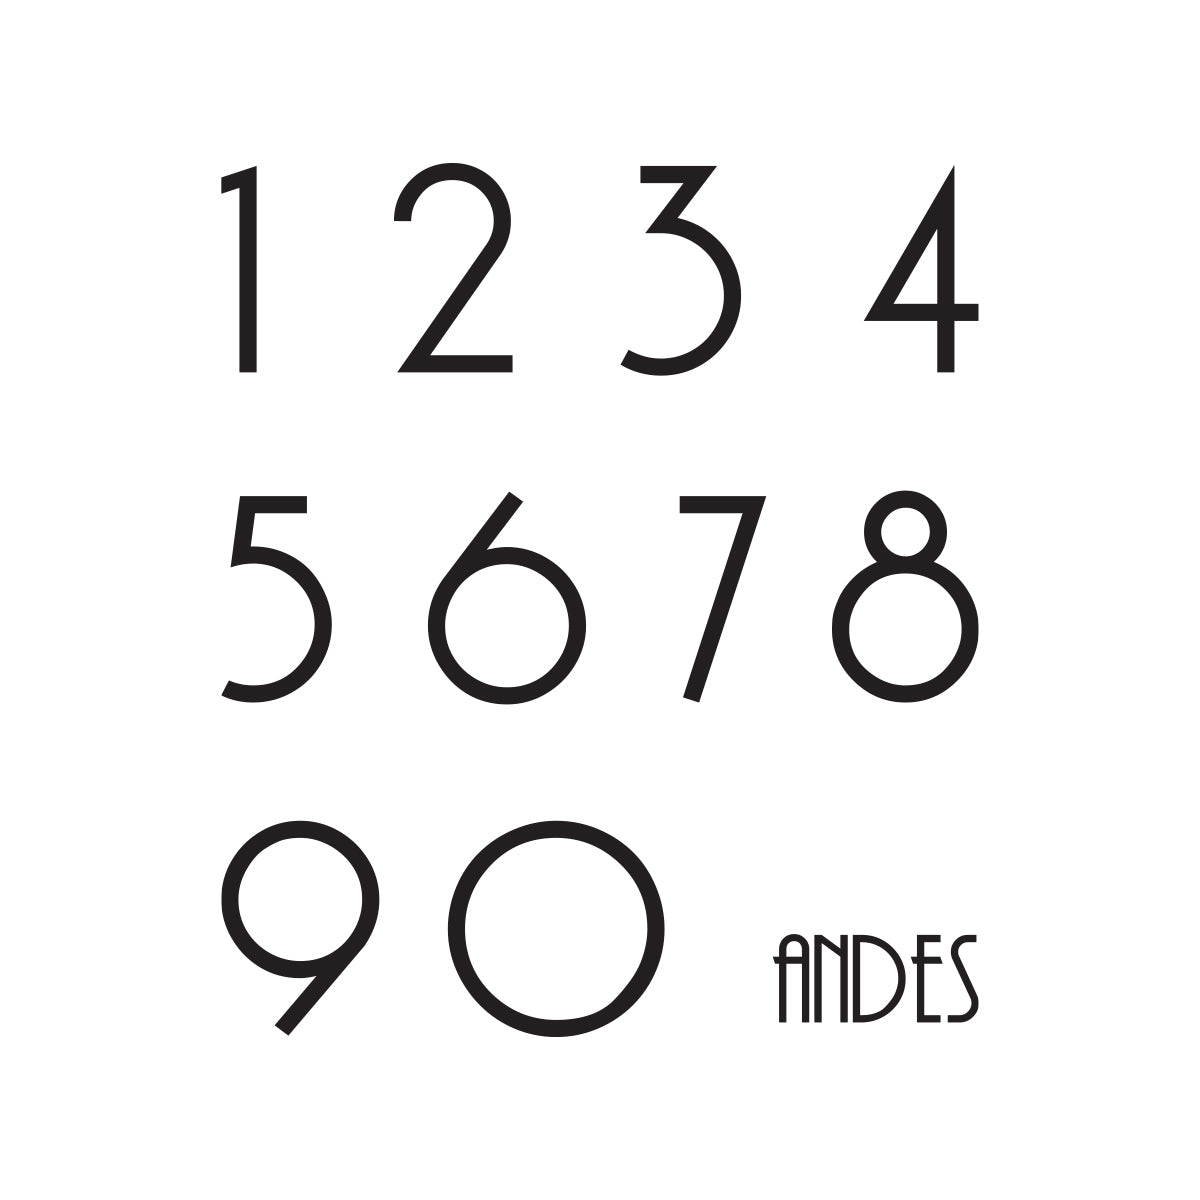 Oval-Andes Number.